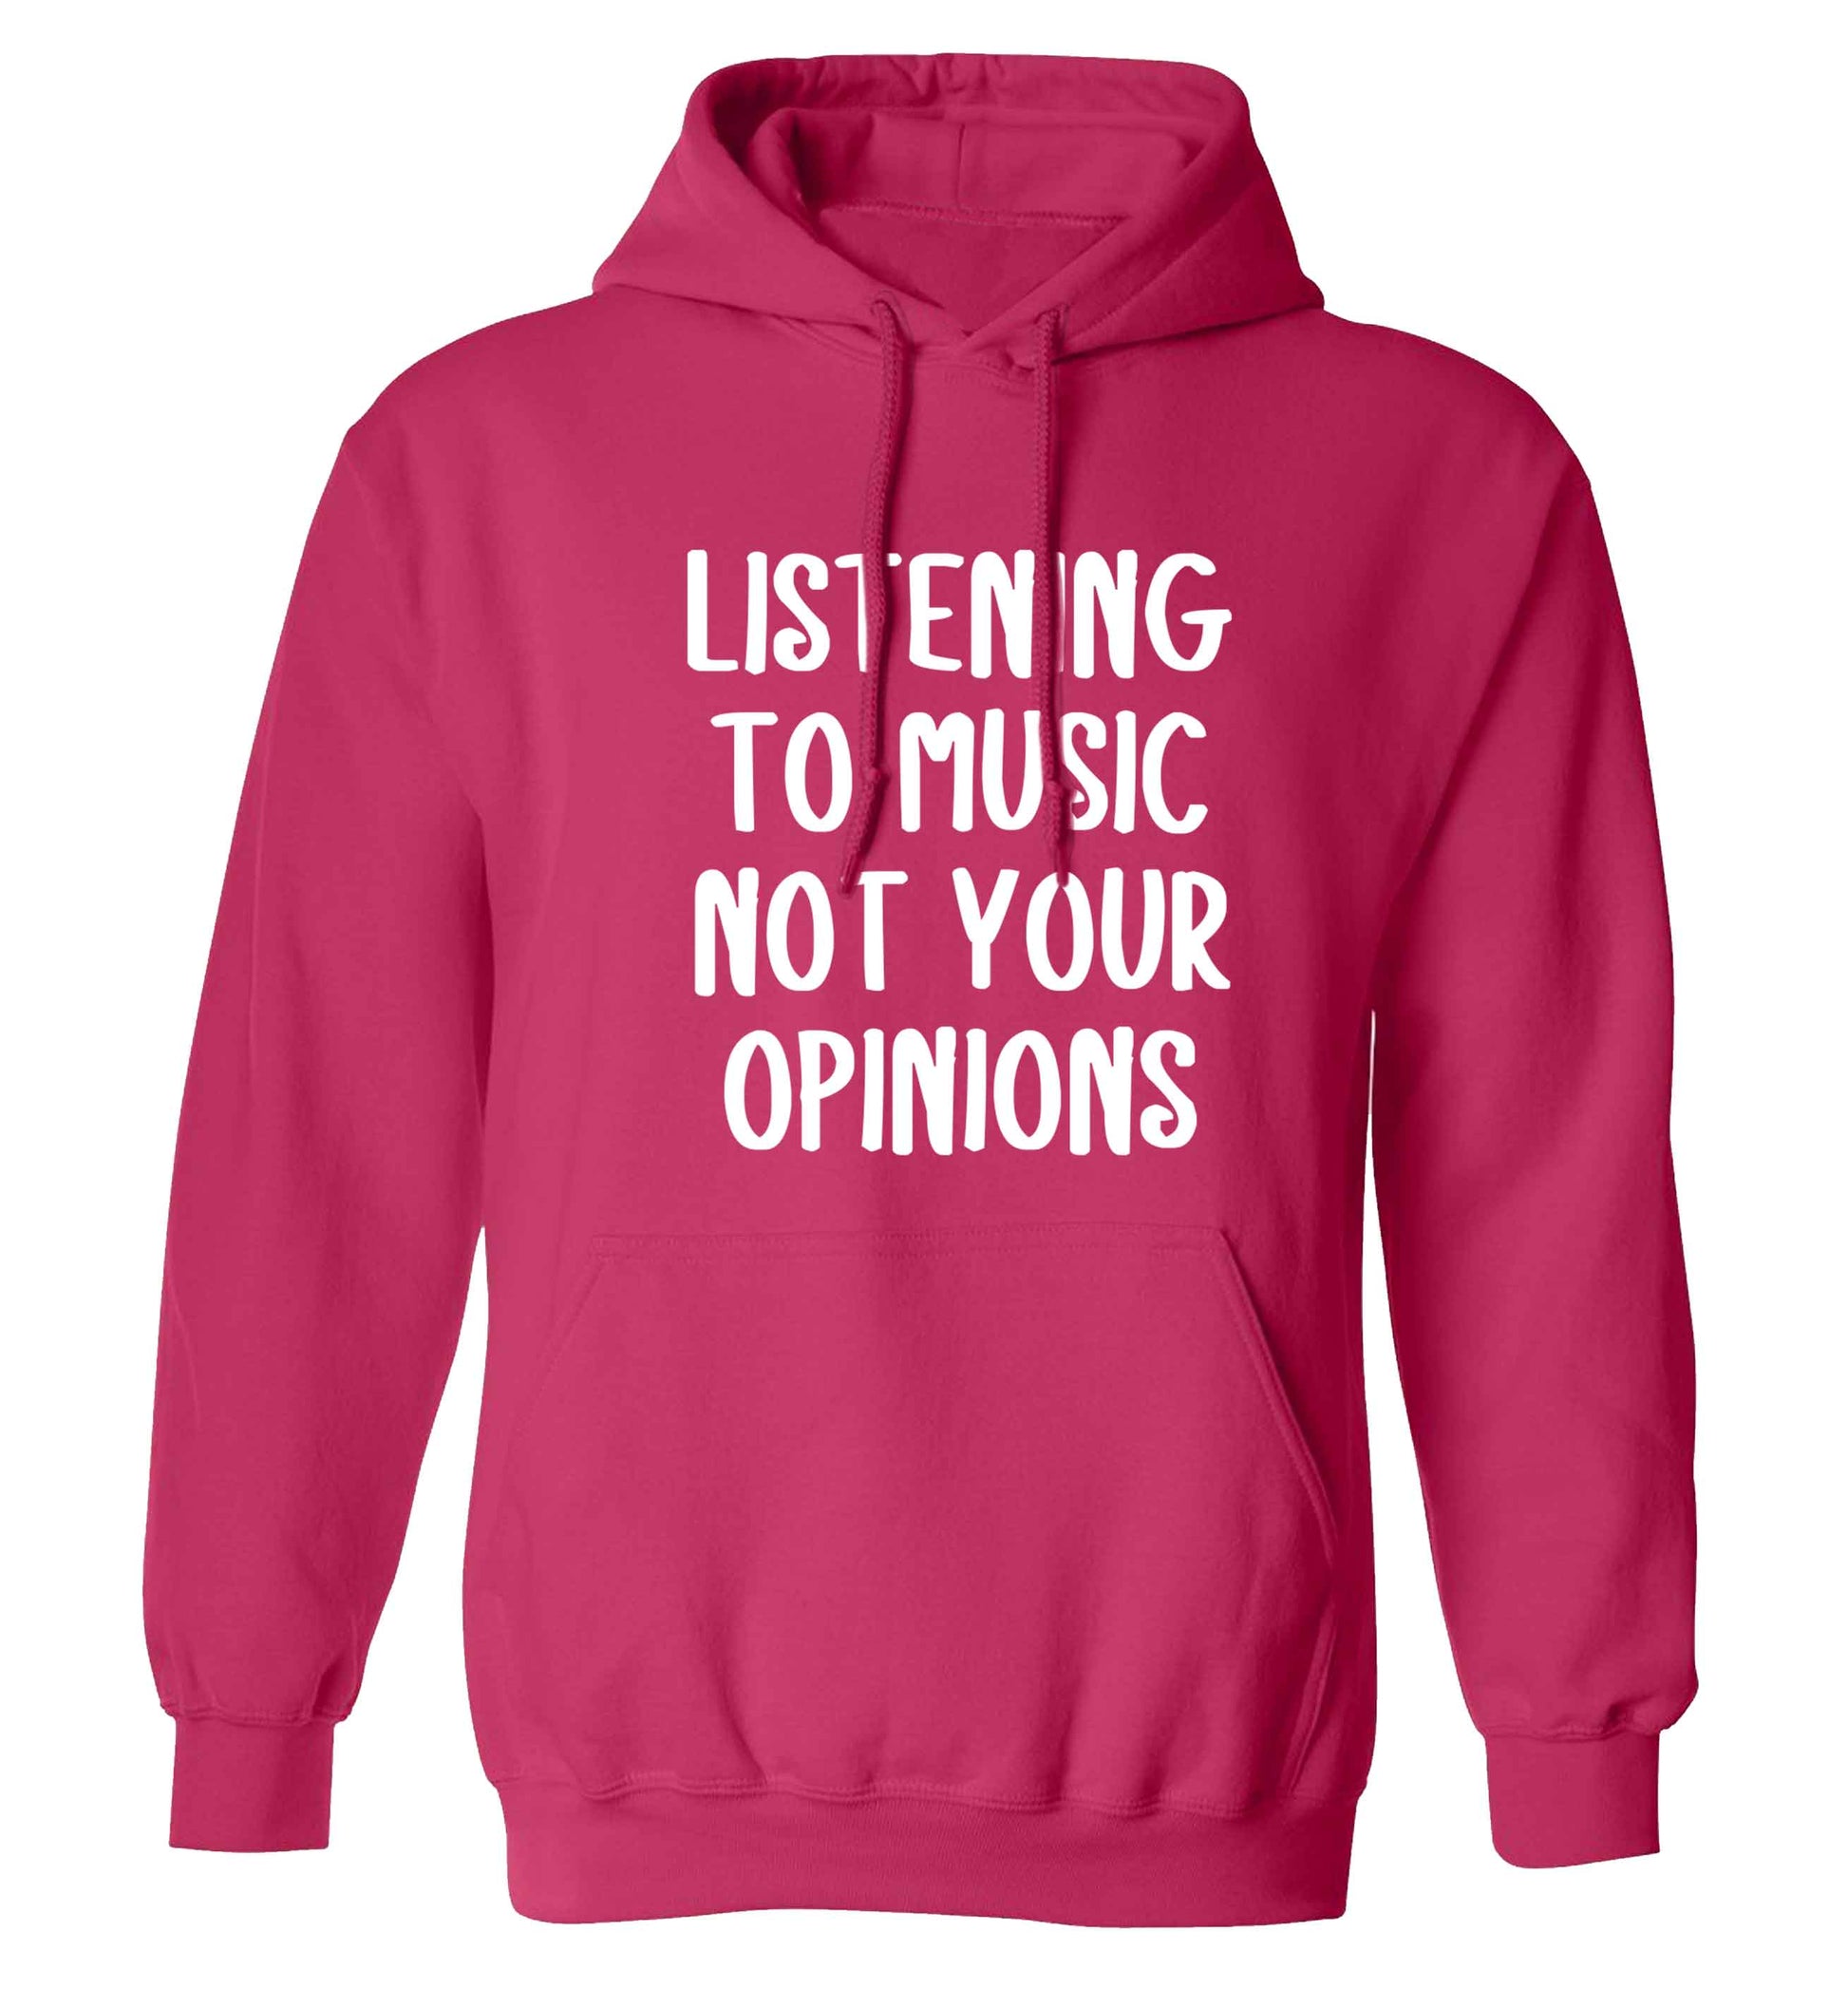 Listening to music not your opinions adults unisex pink hoodie 2XL